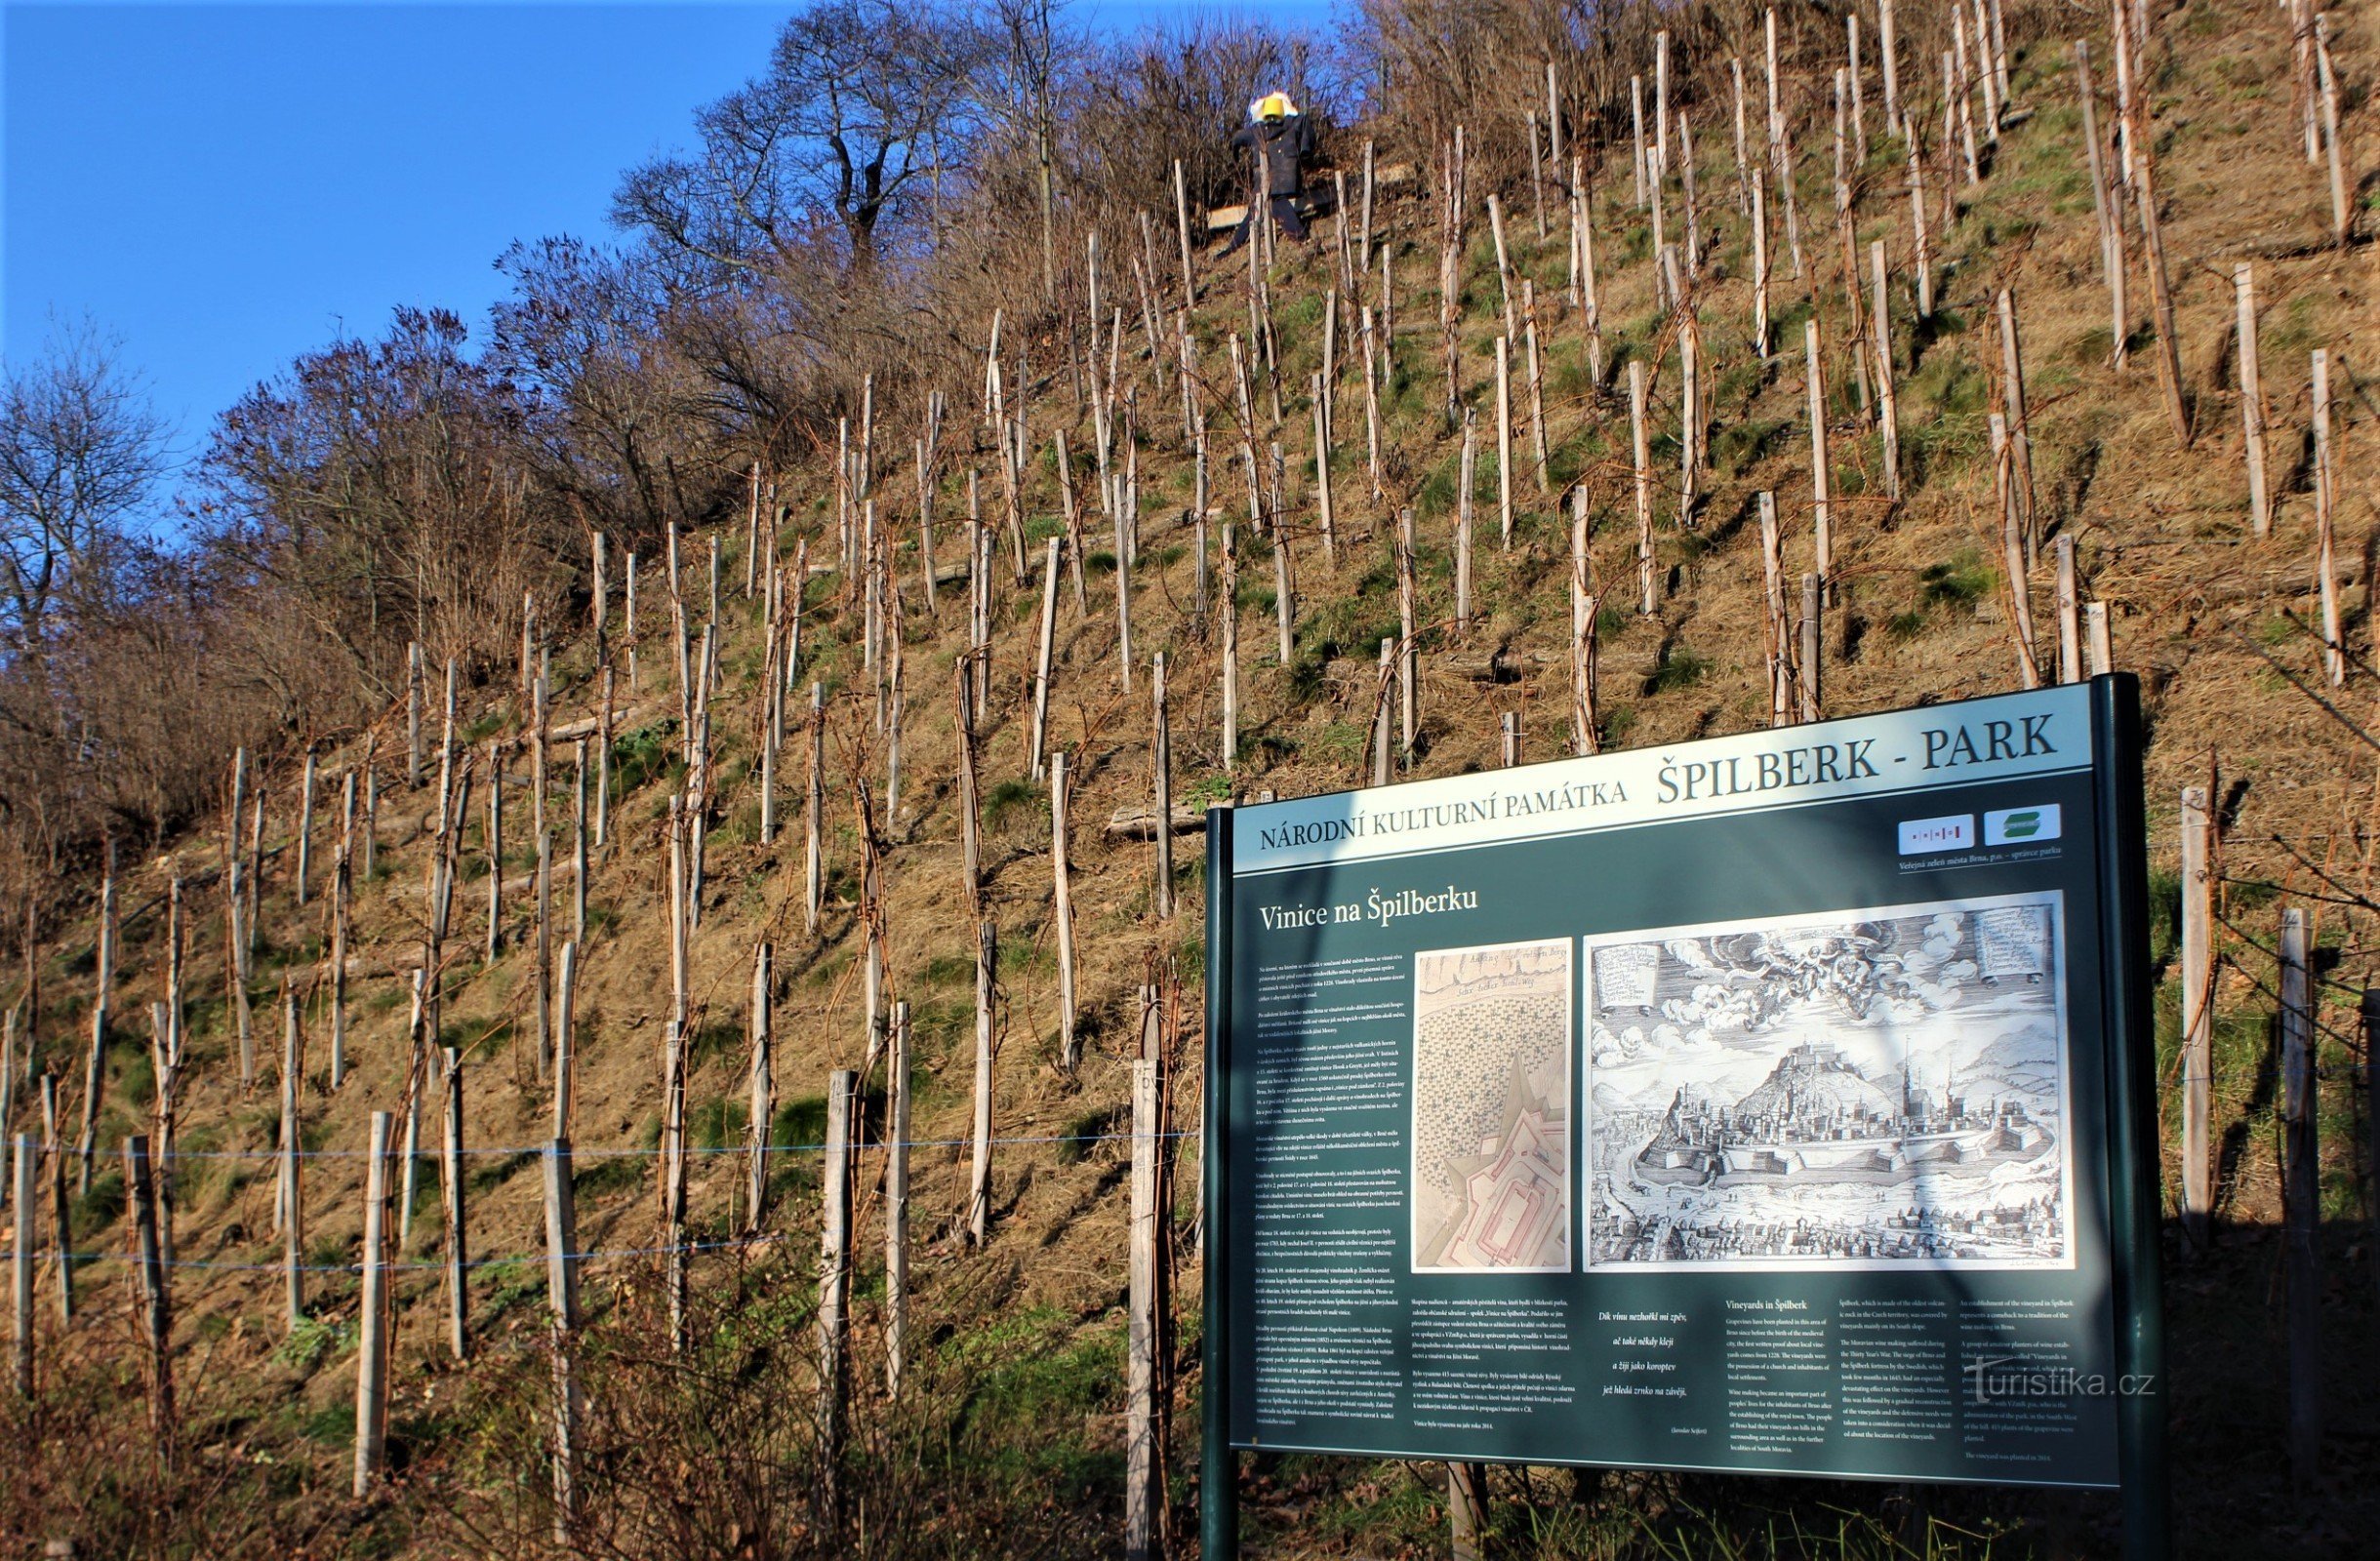 Vineyard with information board